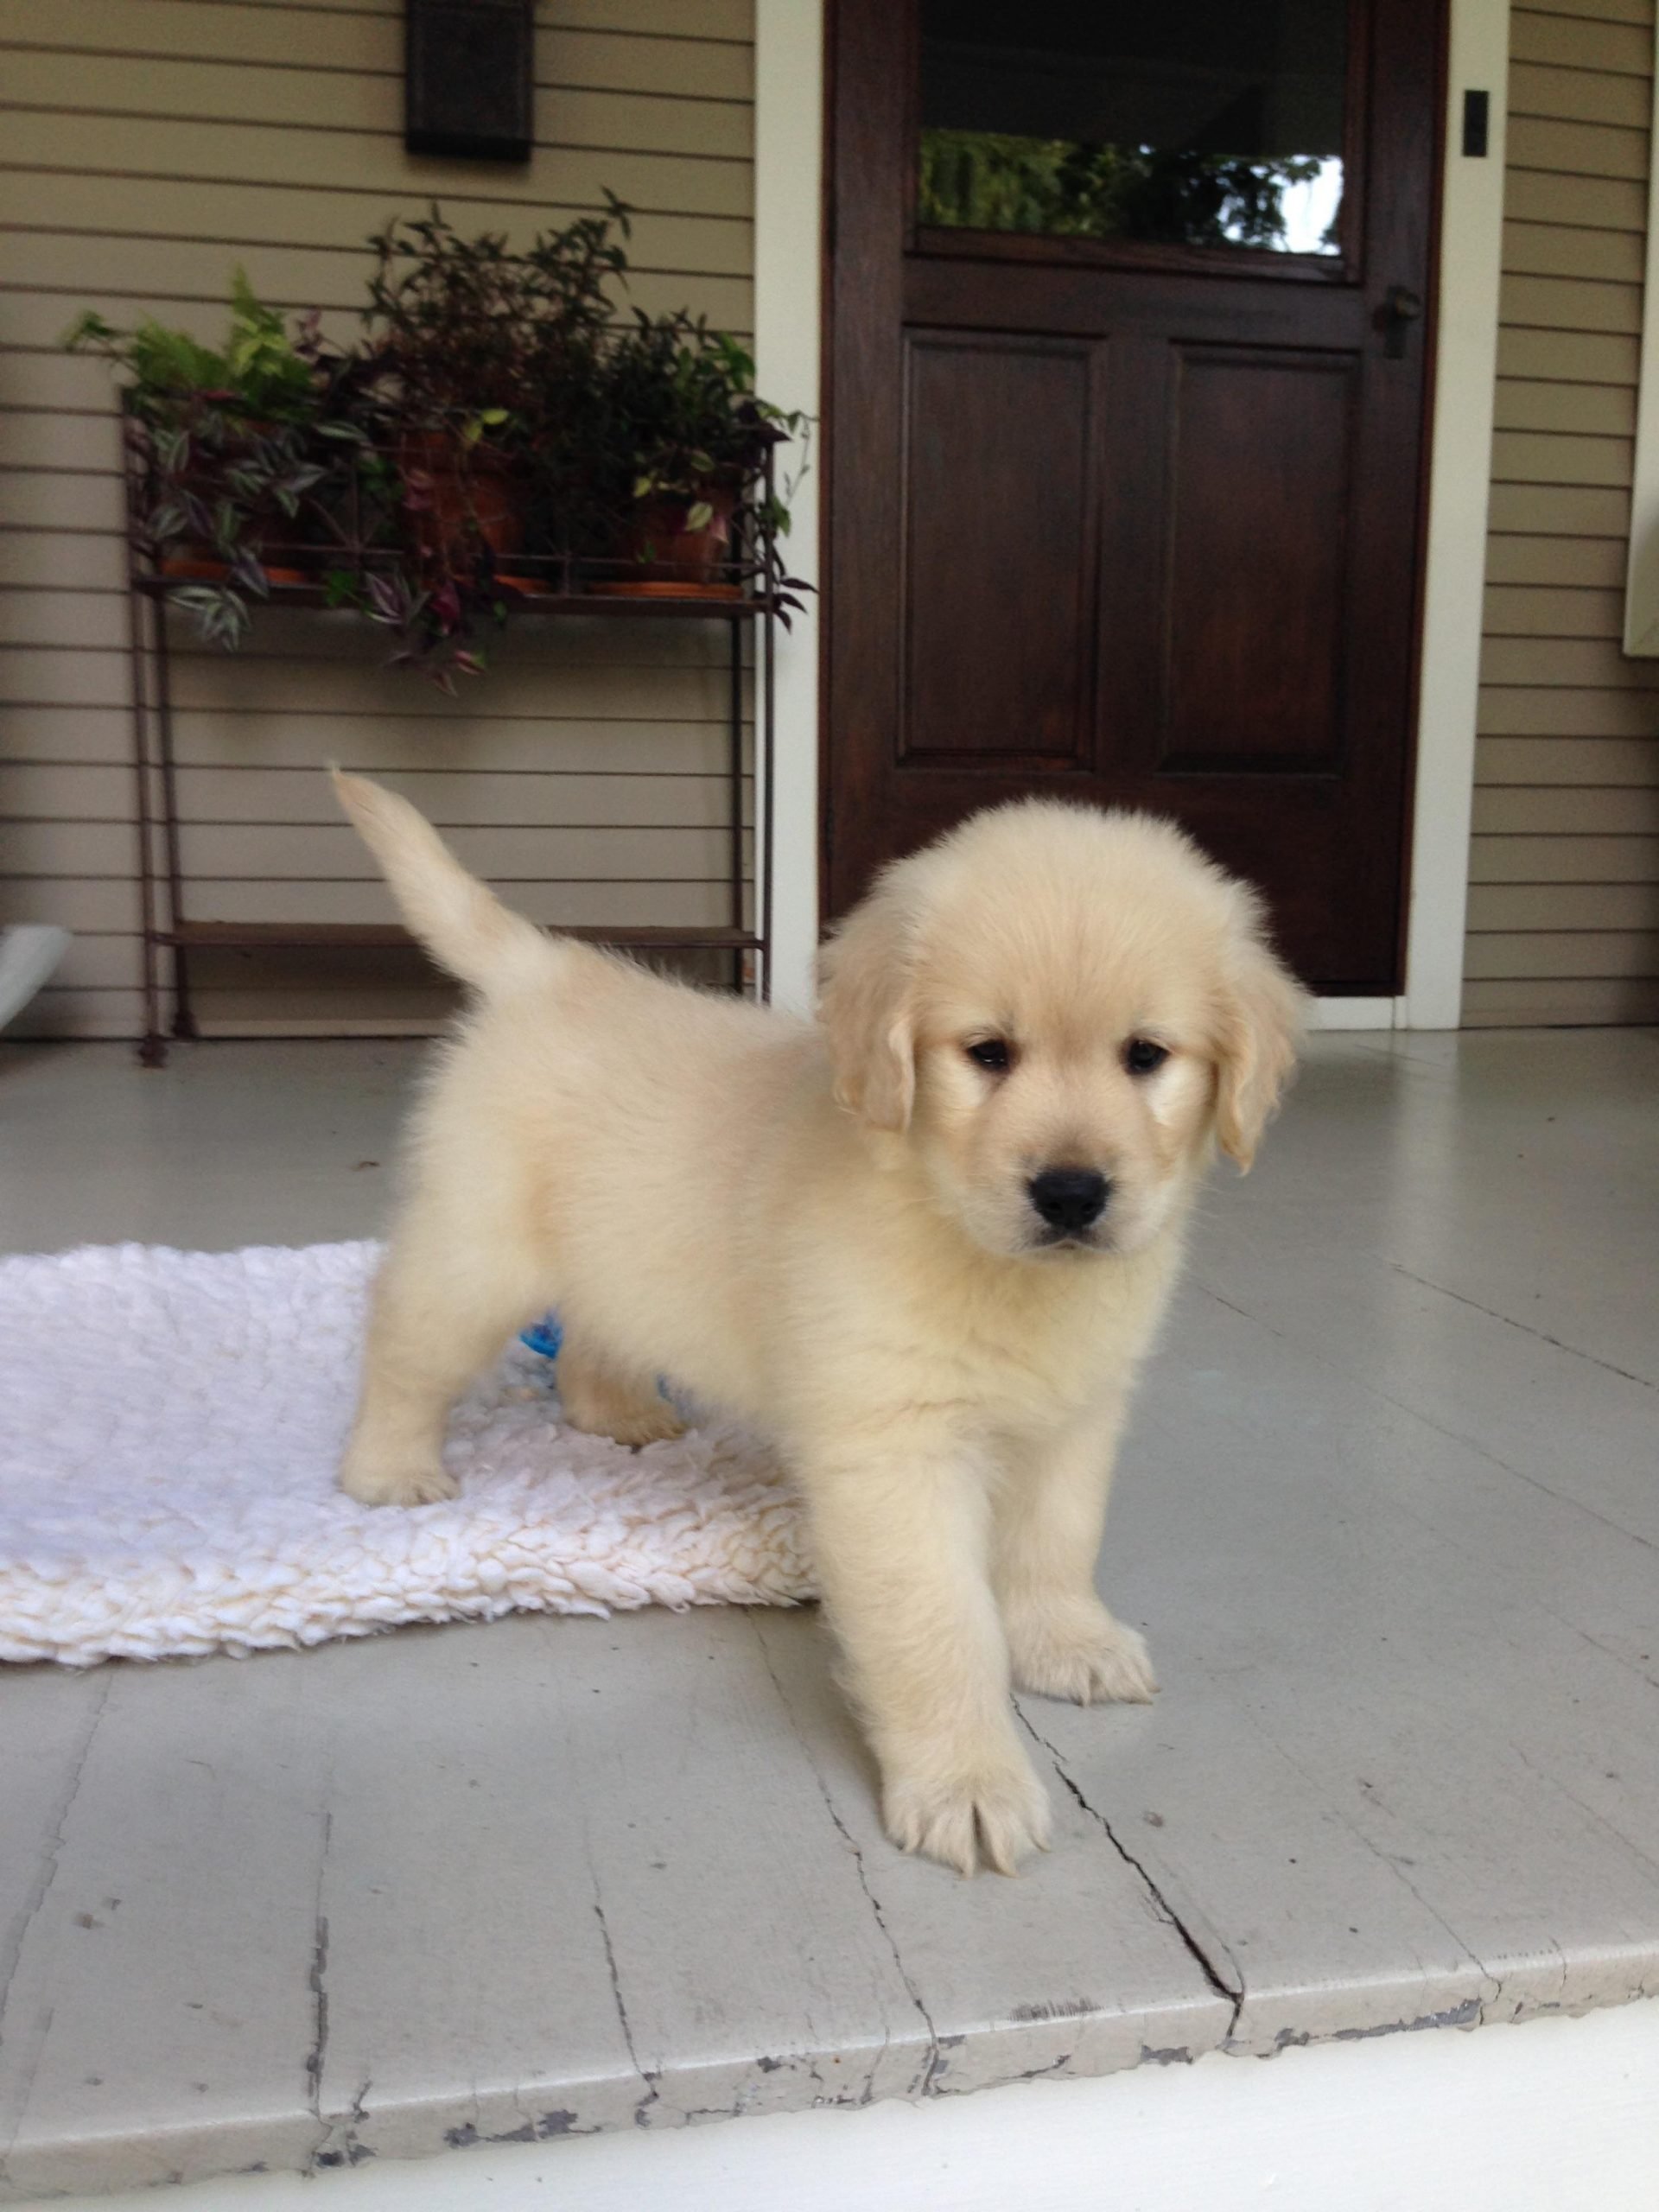 Our golden retriever puppy at 8 weeks old! : aww